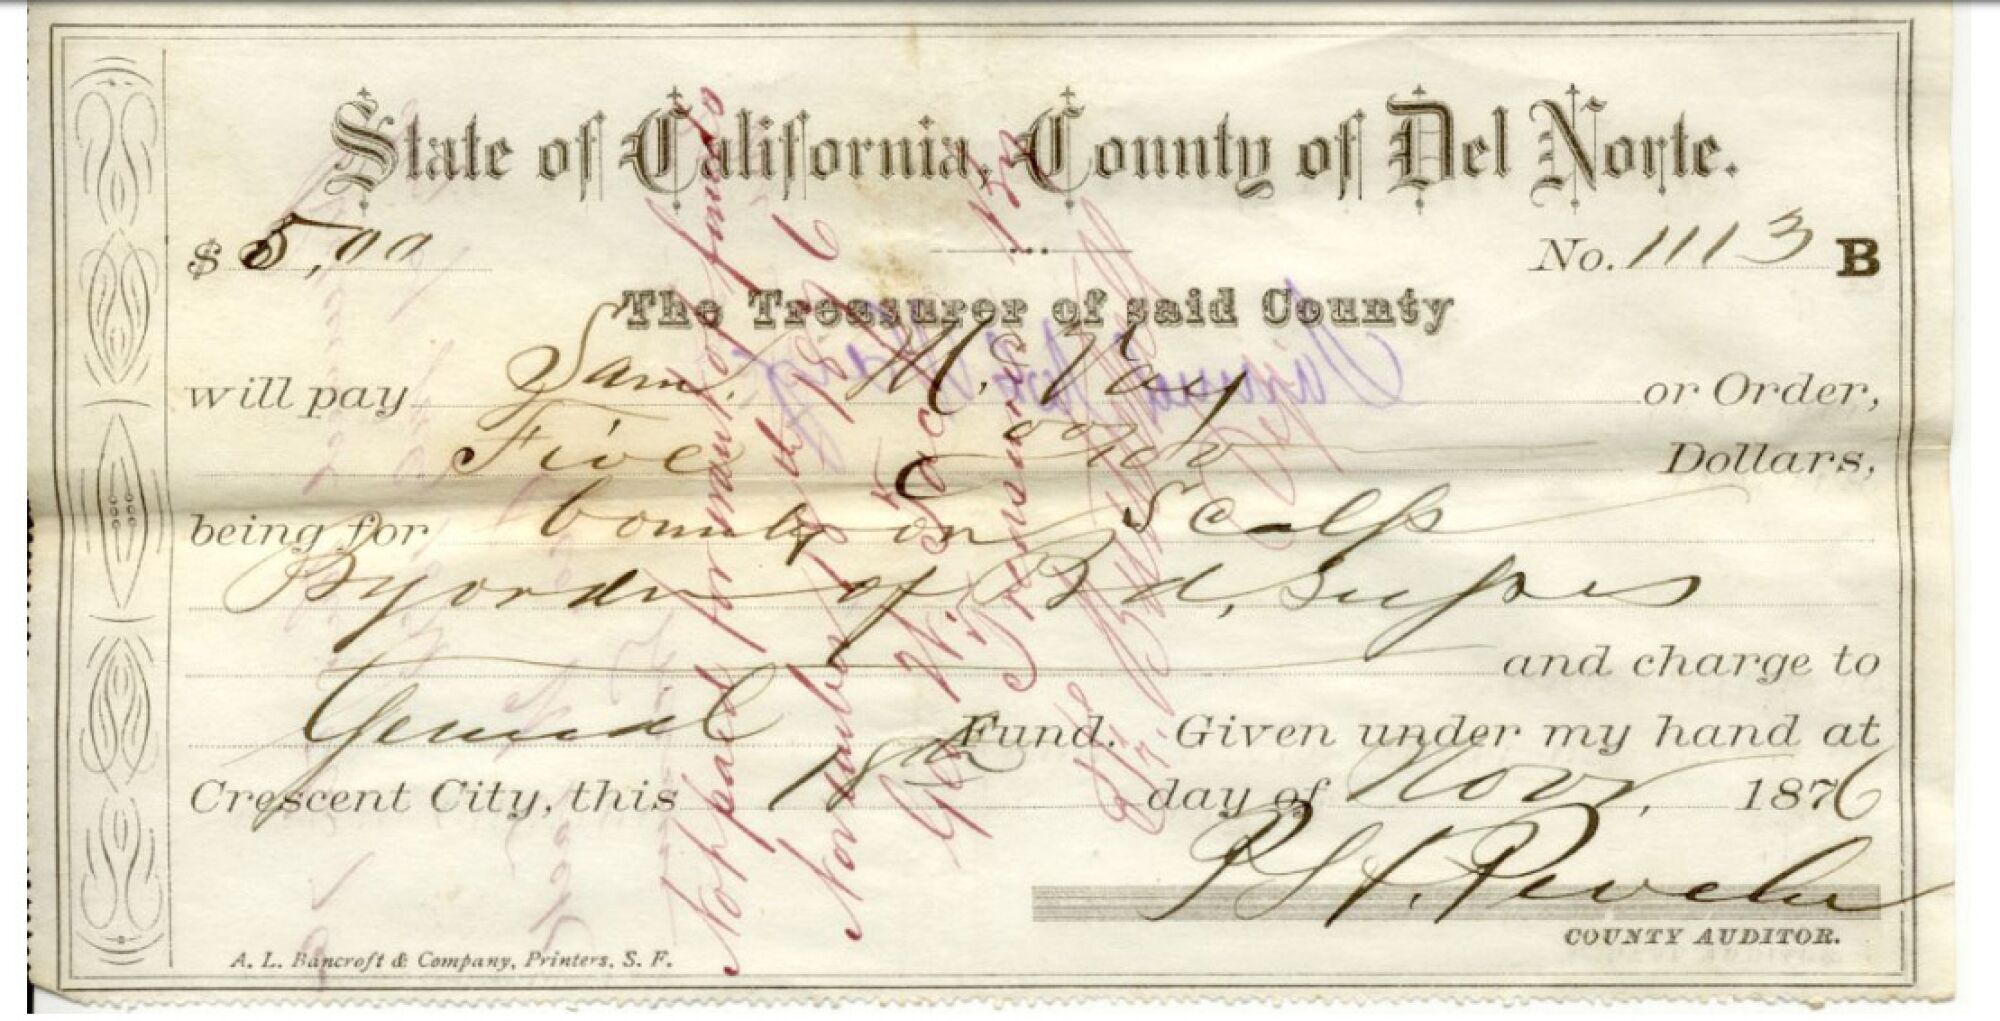 Original receipt for "bounty on scalp" in the amount of $5